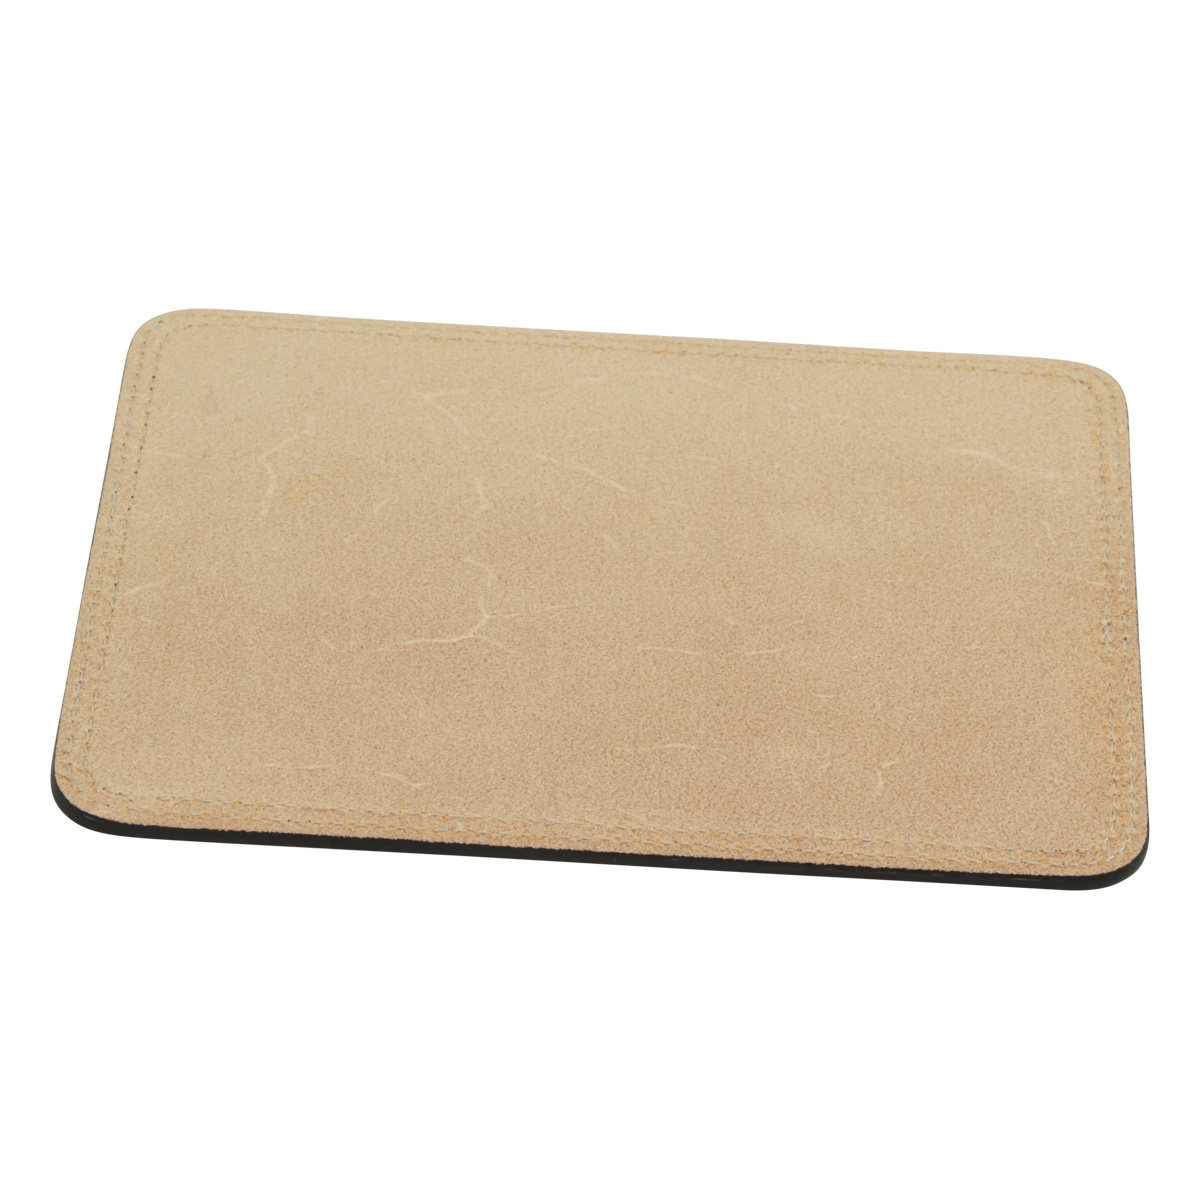 Leather mouse pad - green | 761089VE | EURO | Old Angler Firenze